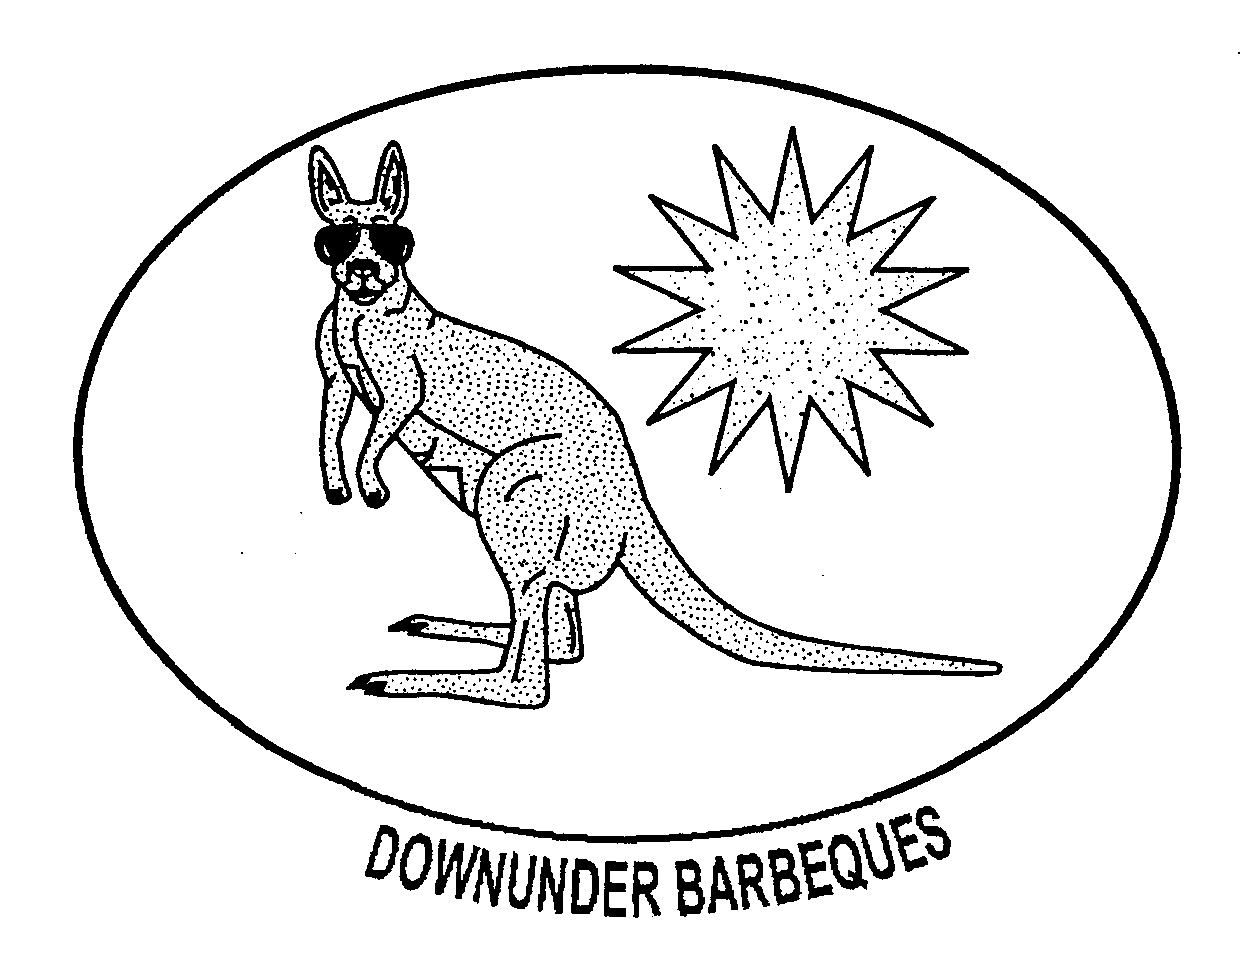  DOWNUNDER BARBEQUES